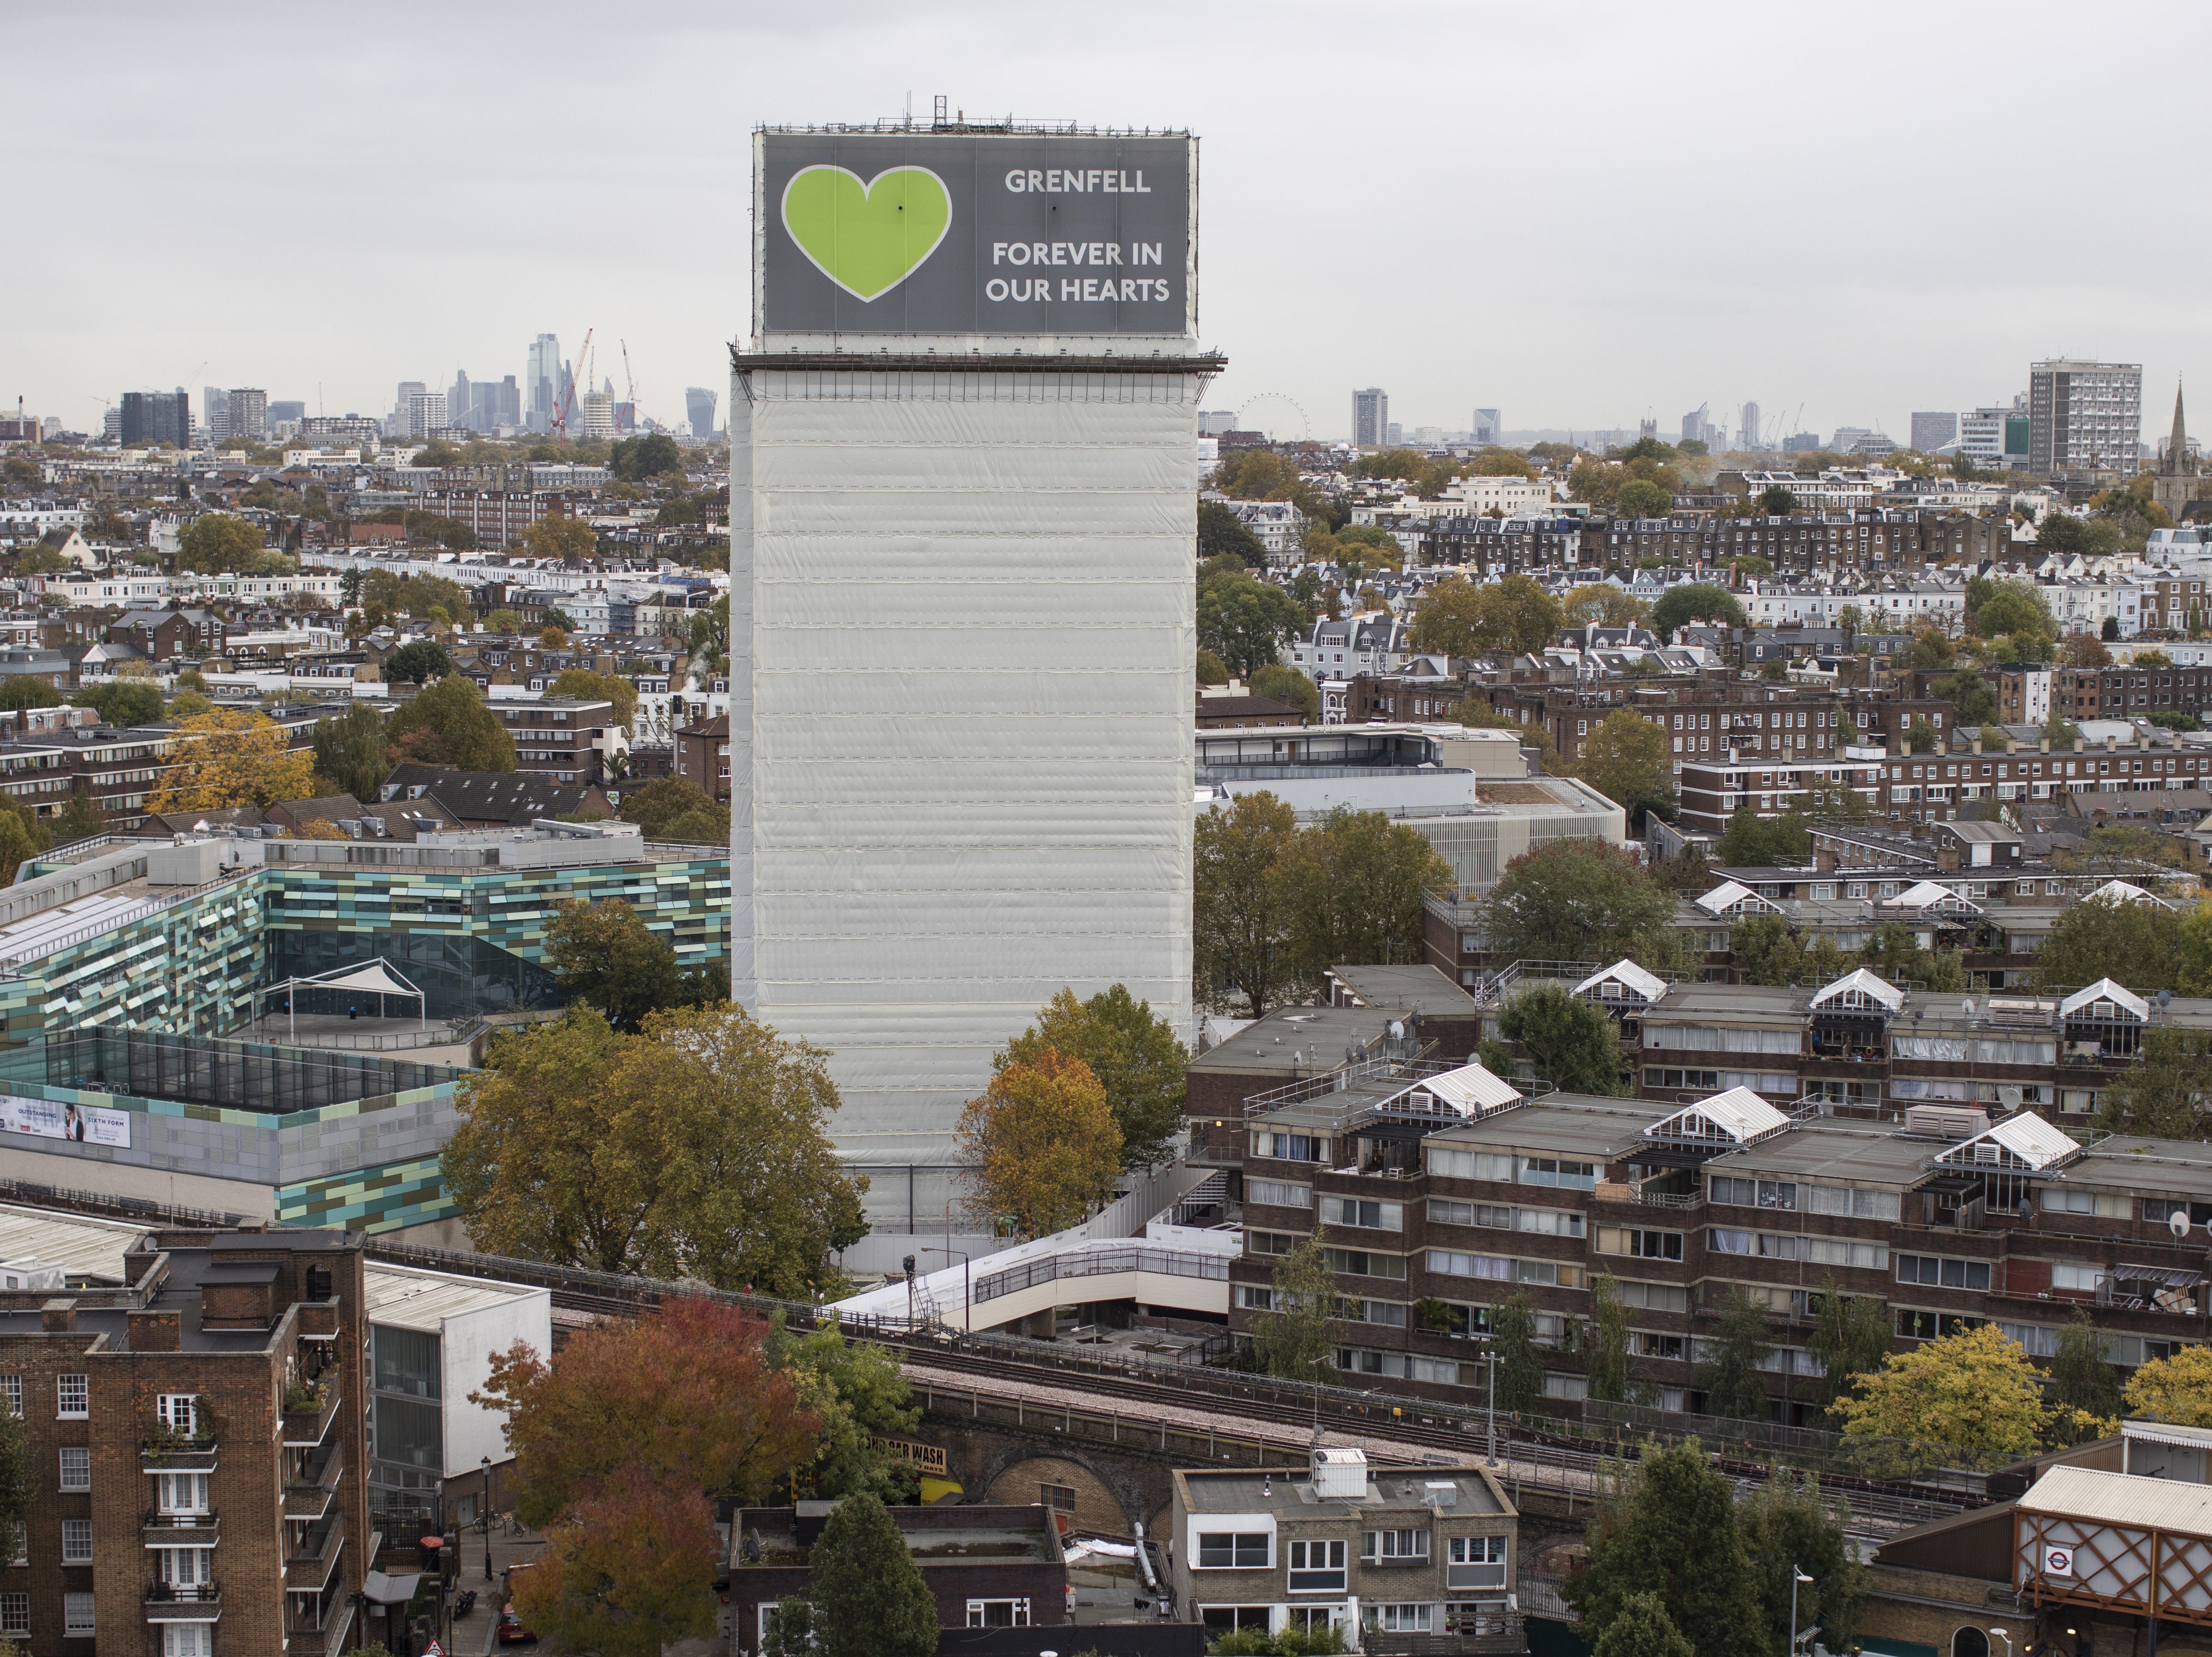 Grenfell may be visible for miles around but it seems not to have been noticed by Westminster and Whitehall